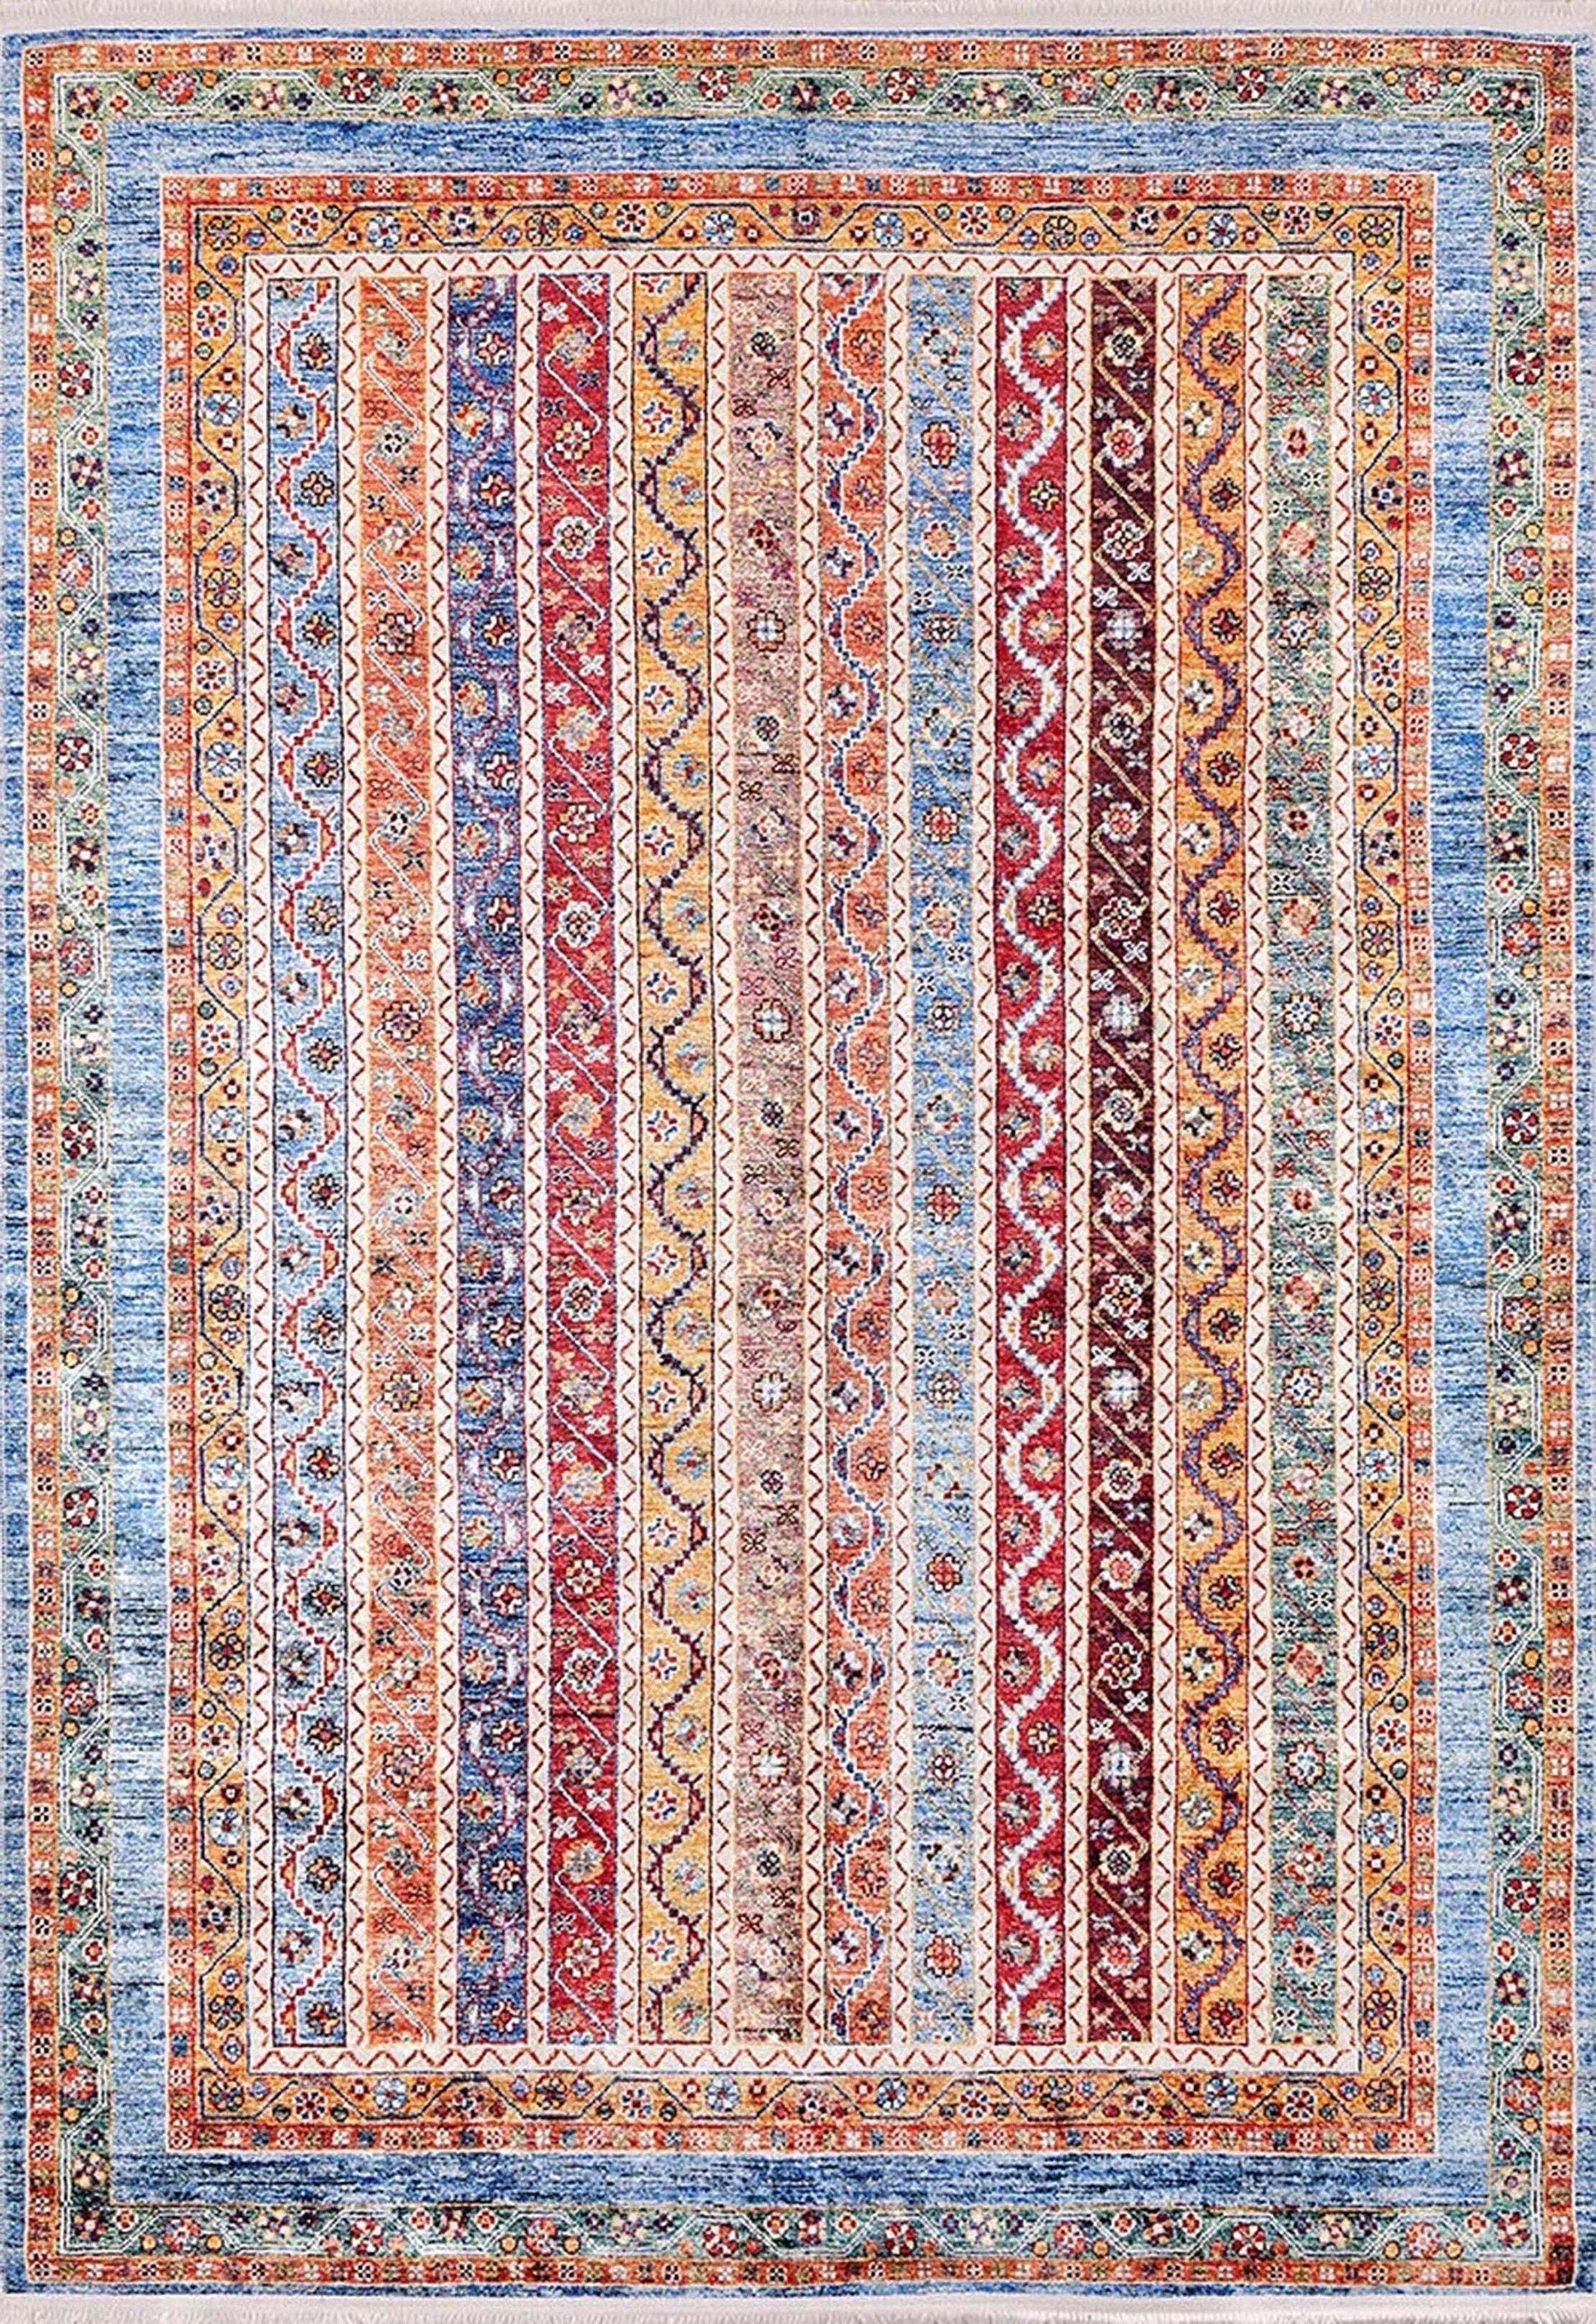 2x3 Turkish Rug, Orange Blue Rugs, Small Area Rugs 3x5 4x6 Traditional Vintage Design Rugs For Kitchen Bathroom Bedside Bedroom Entryway - famerugs